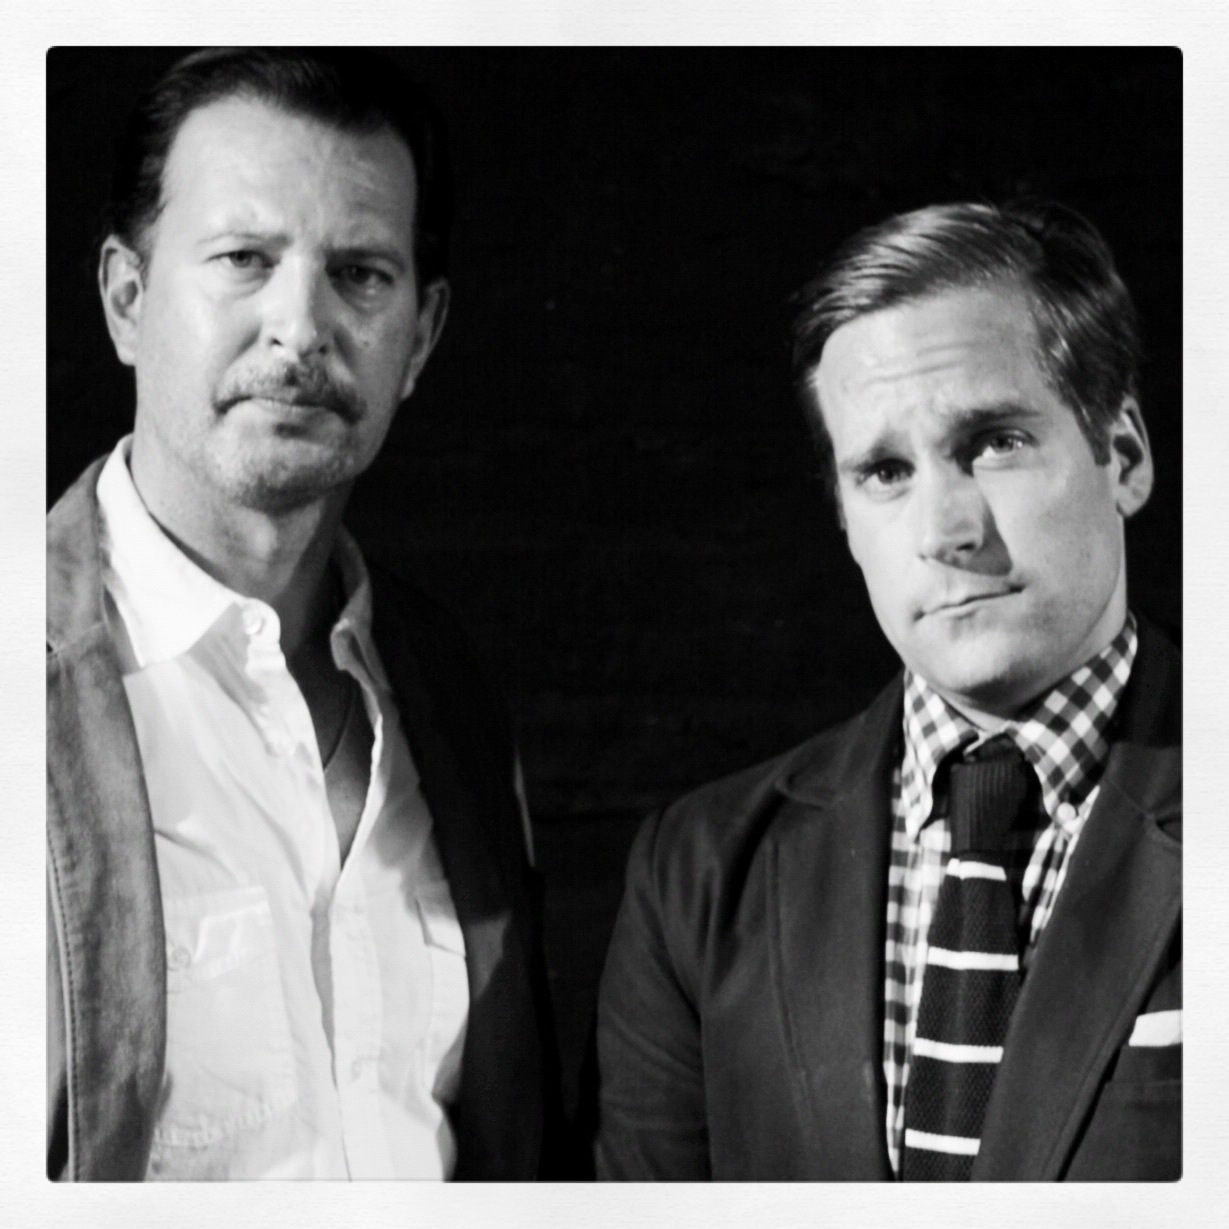 NYAS - Professional Ensemble Co/founders: Christian Keiber as 'Ernest Hemingway' & Tyler Hollinger as 'F. Scott Fitzgerald' in the original play of 